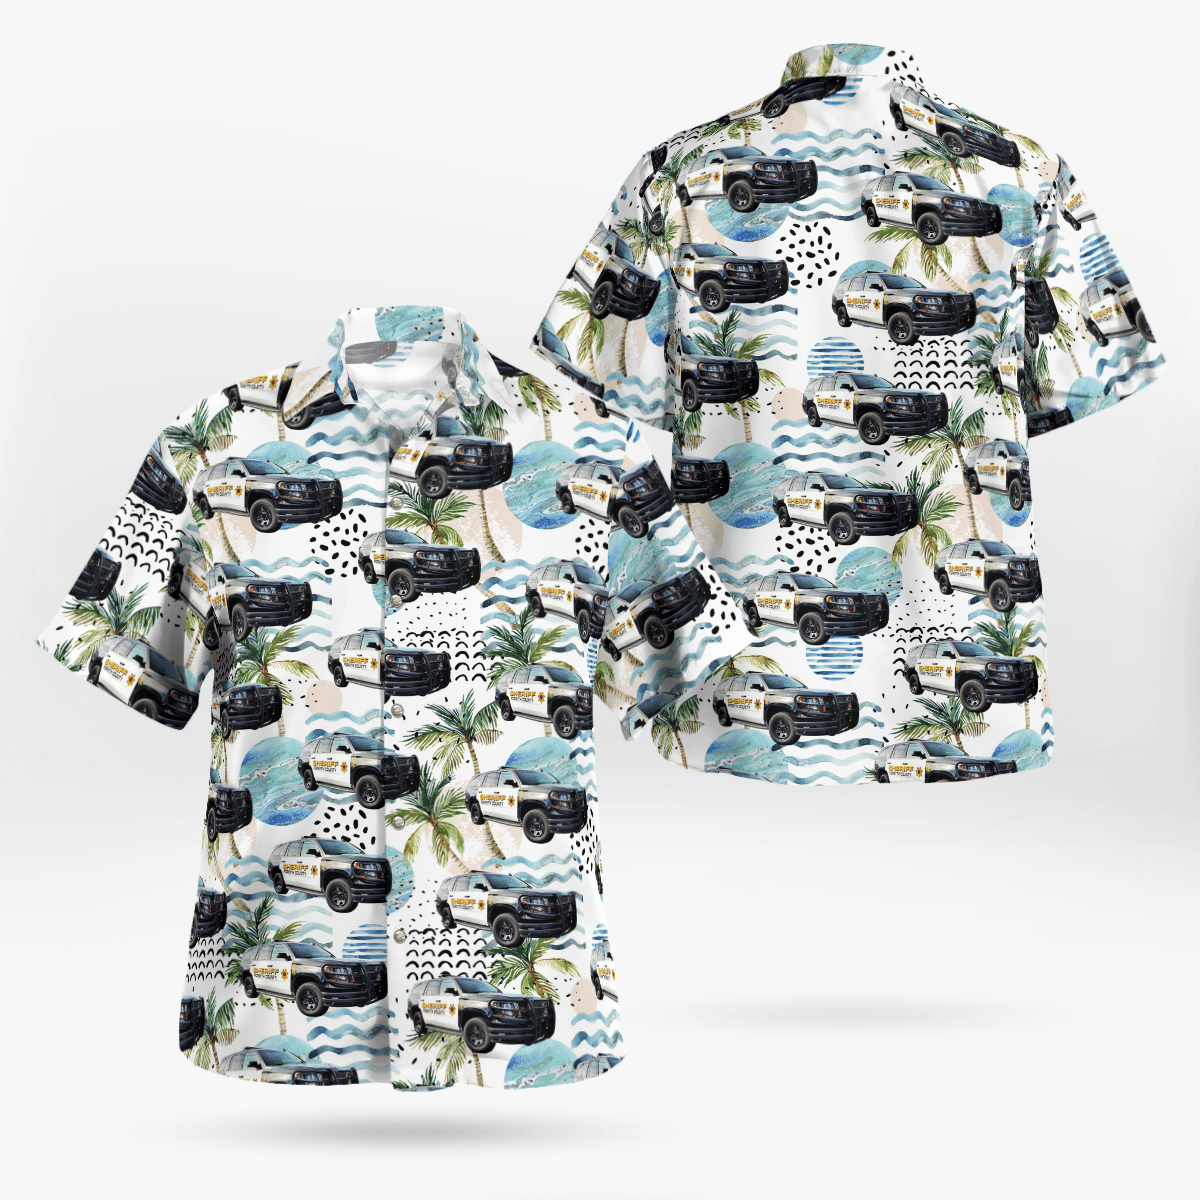 If you are in need of a new summertime look, pick up this Hawaiian shirt 196